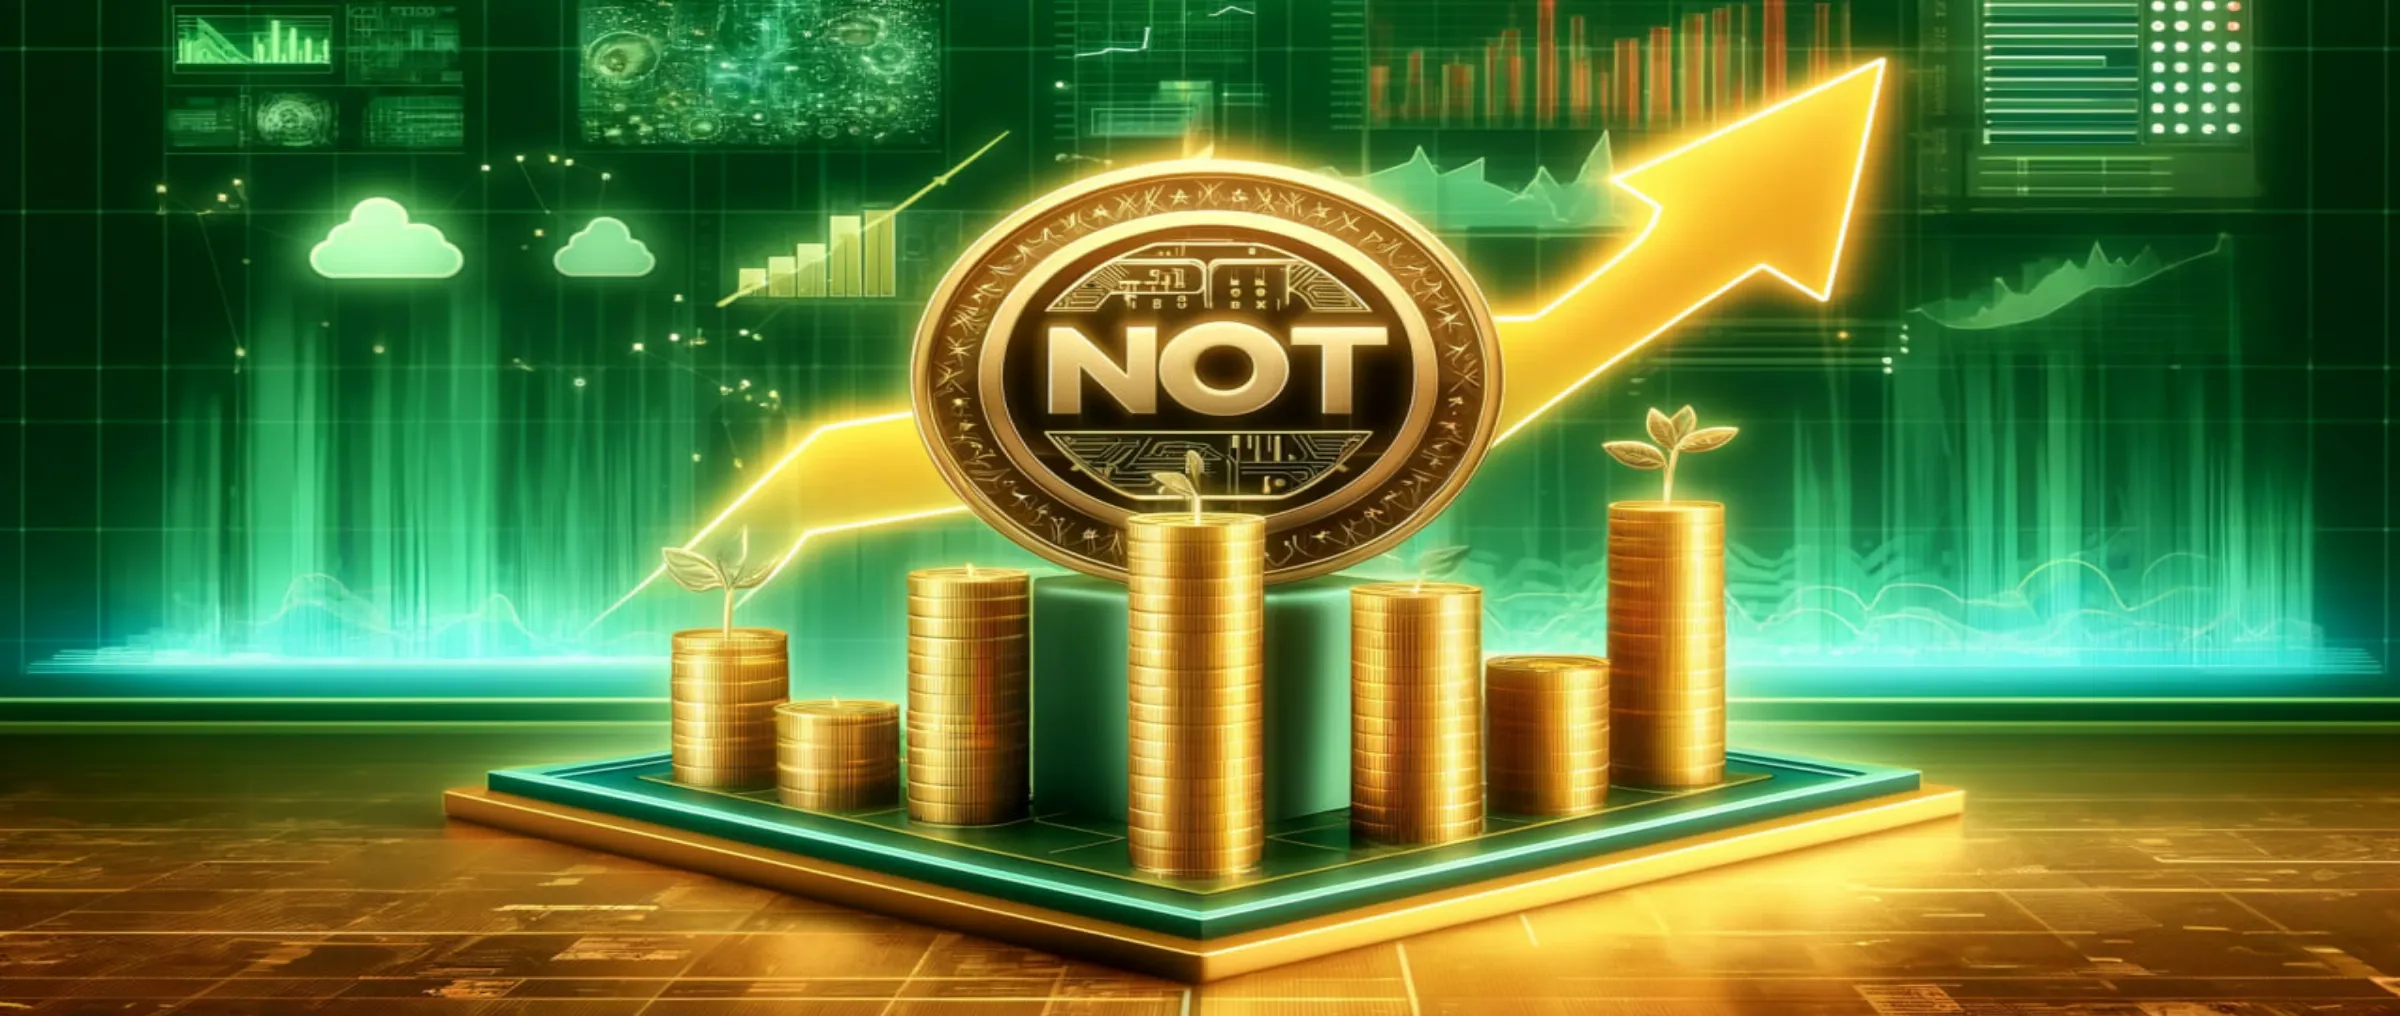 The number of Notcoin players reached 40 million, leading to a token increase